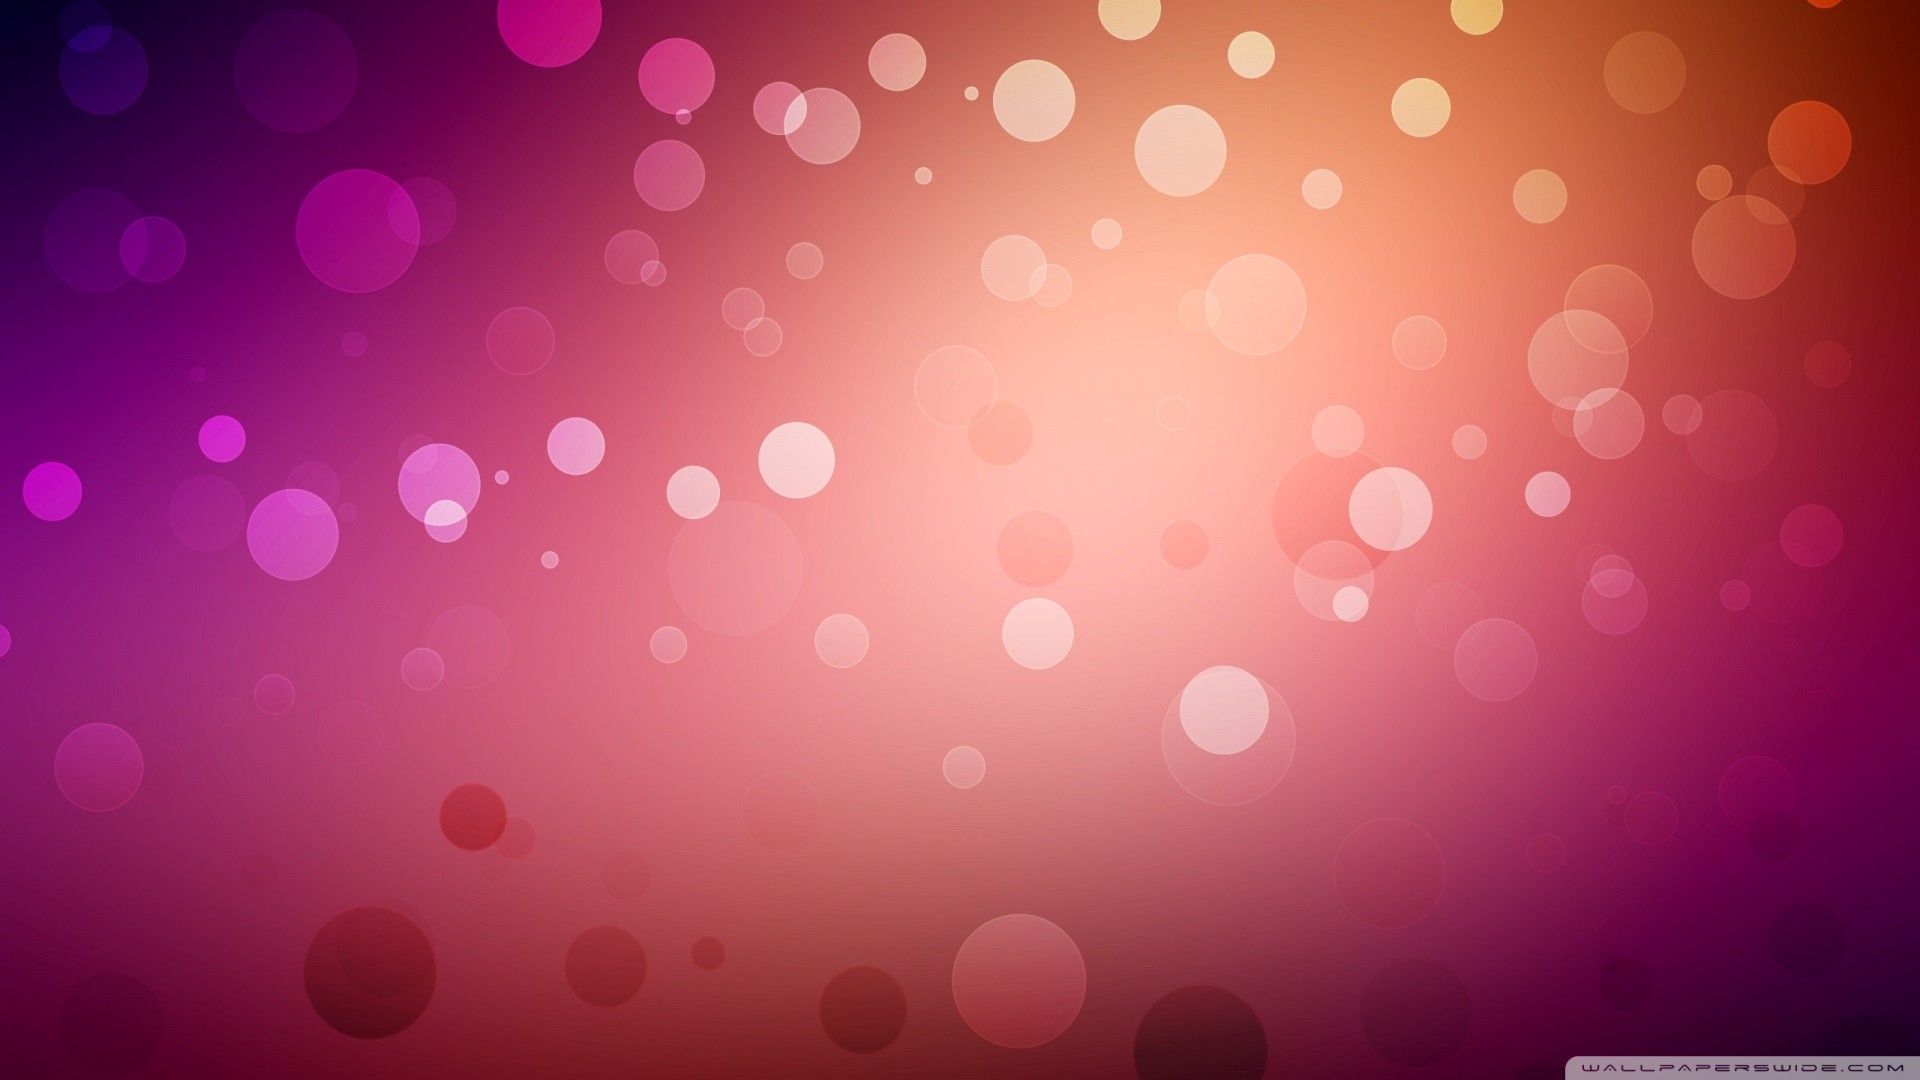 1920x1080 Weekend wallpapers: 23 Android wallpapers with bokeh effect .